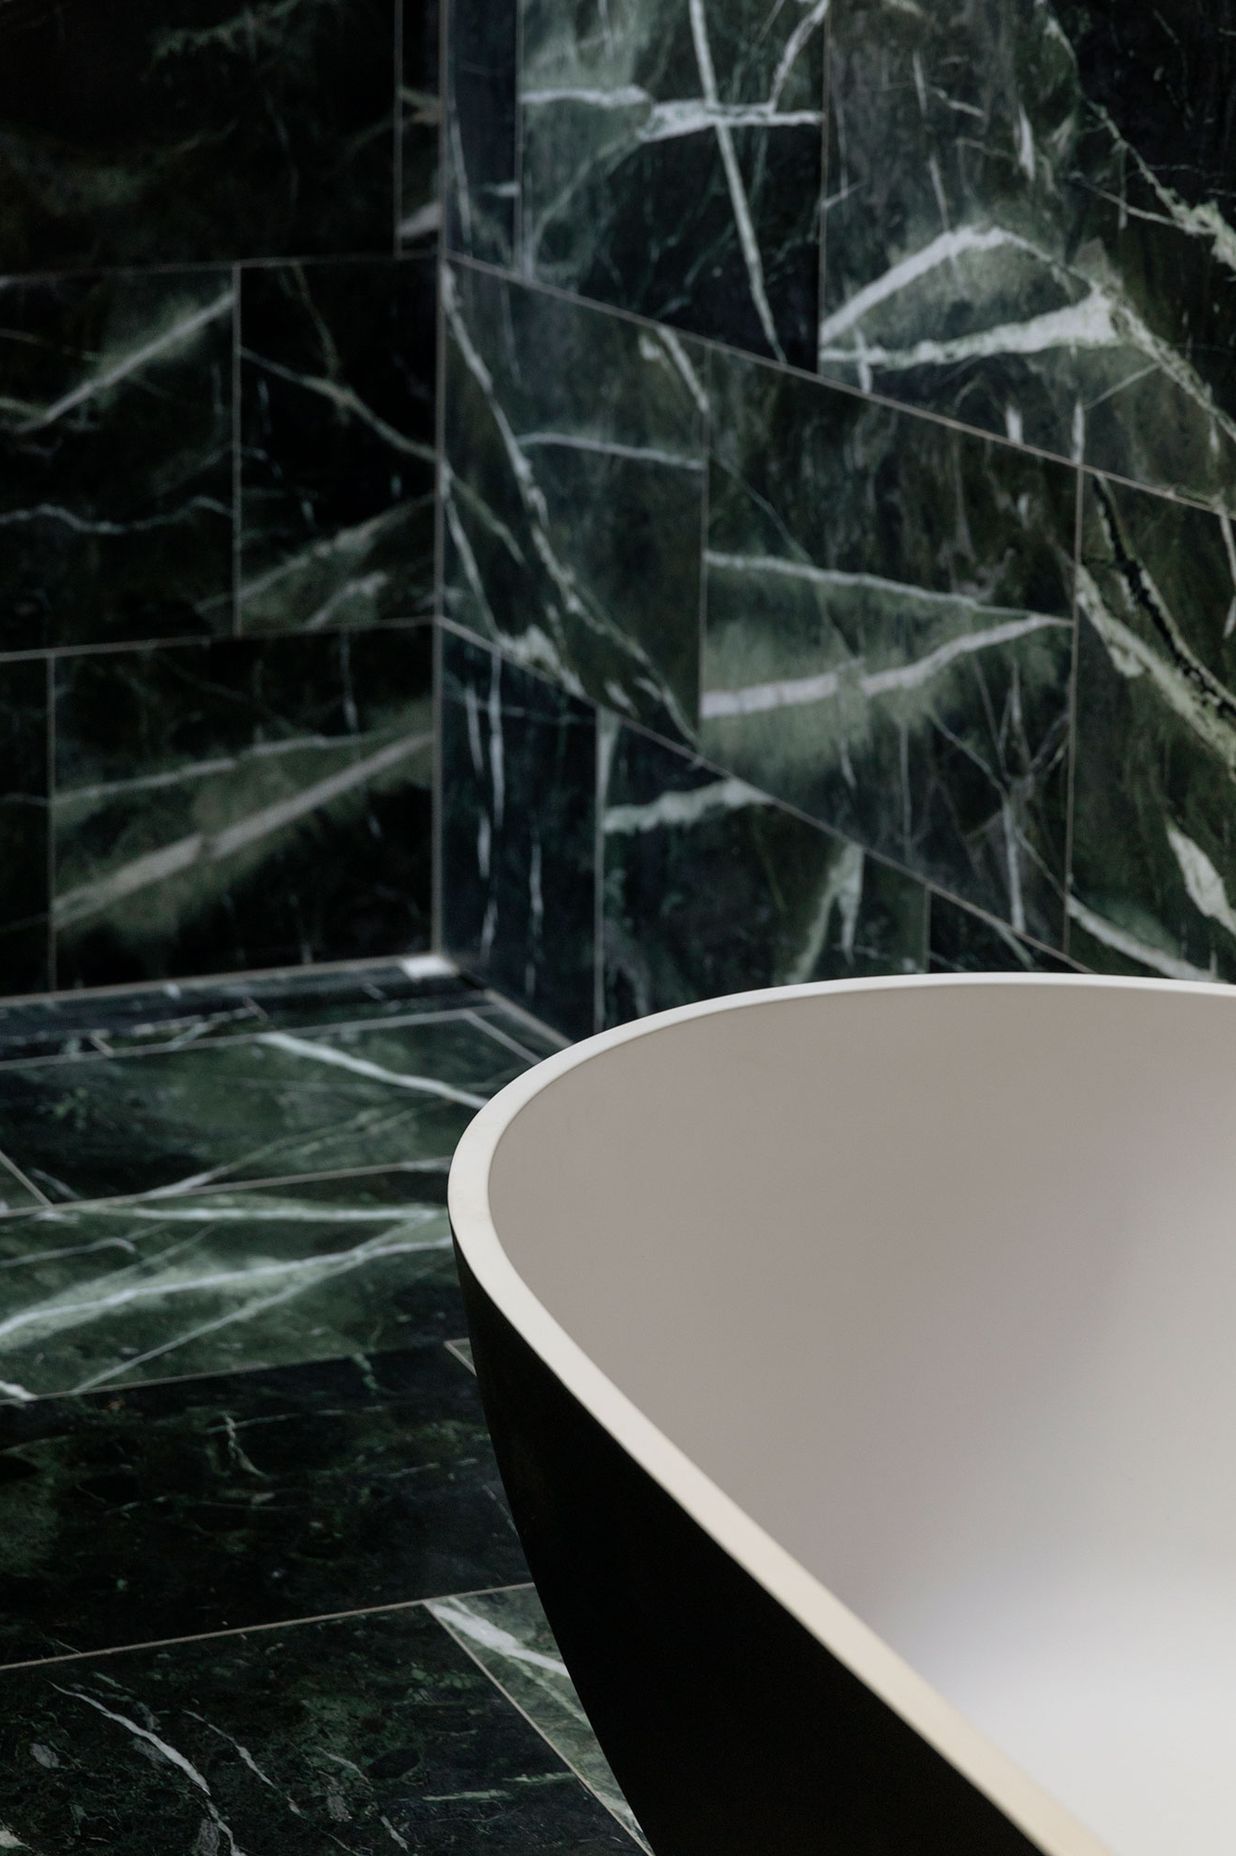 The ensuite bathroom is lined in marble.